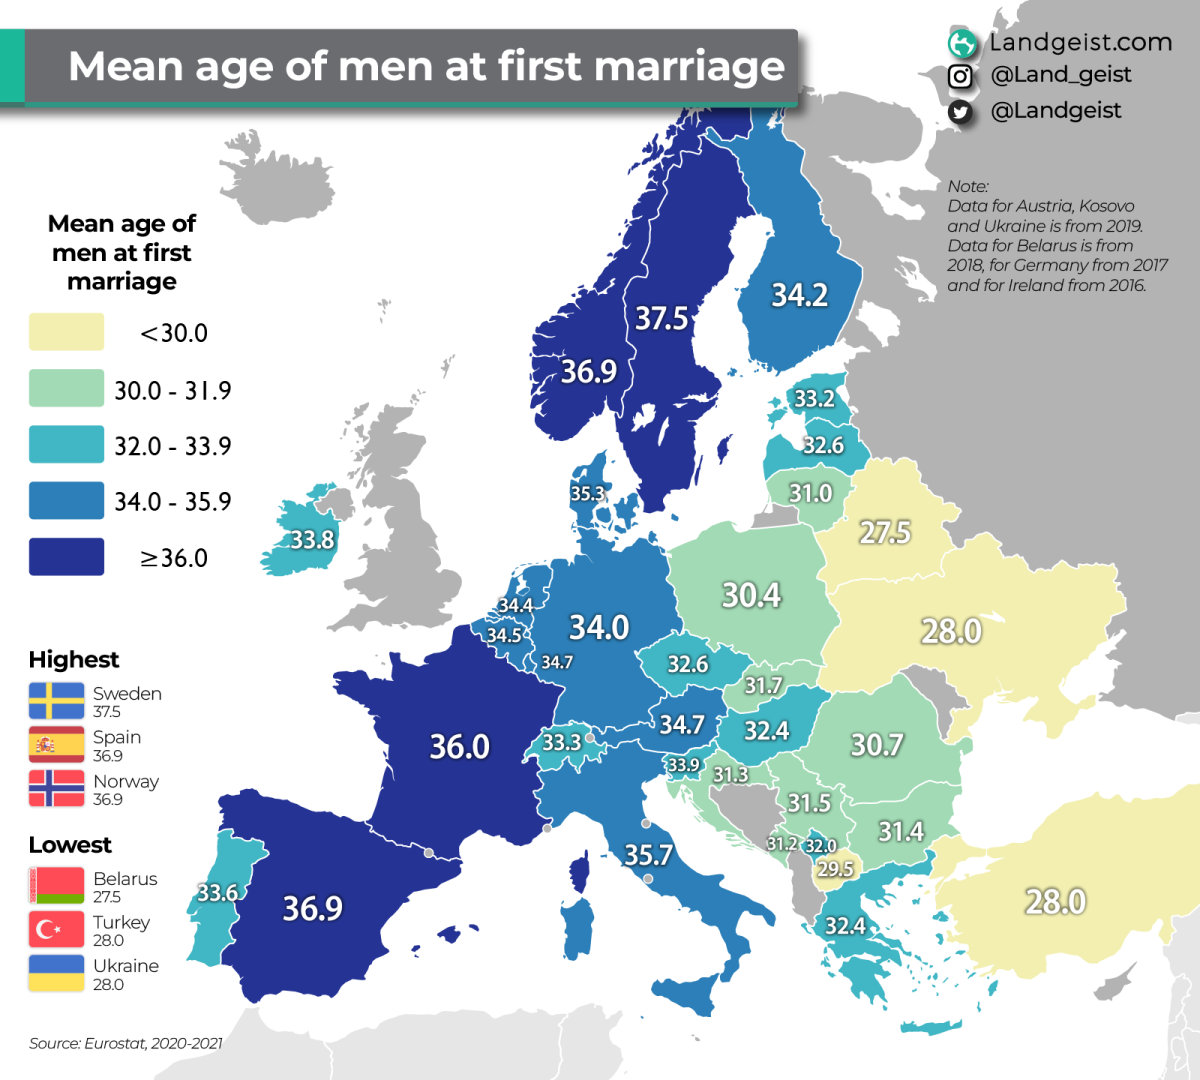 Mean age of men at first marriage in Europe